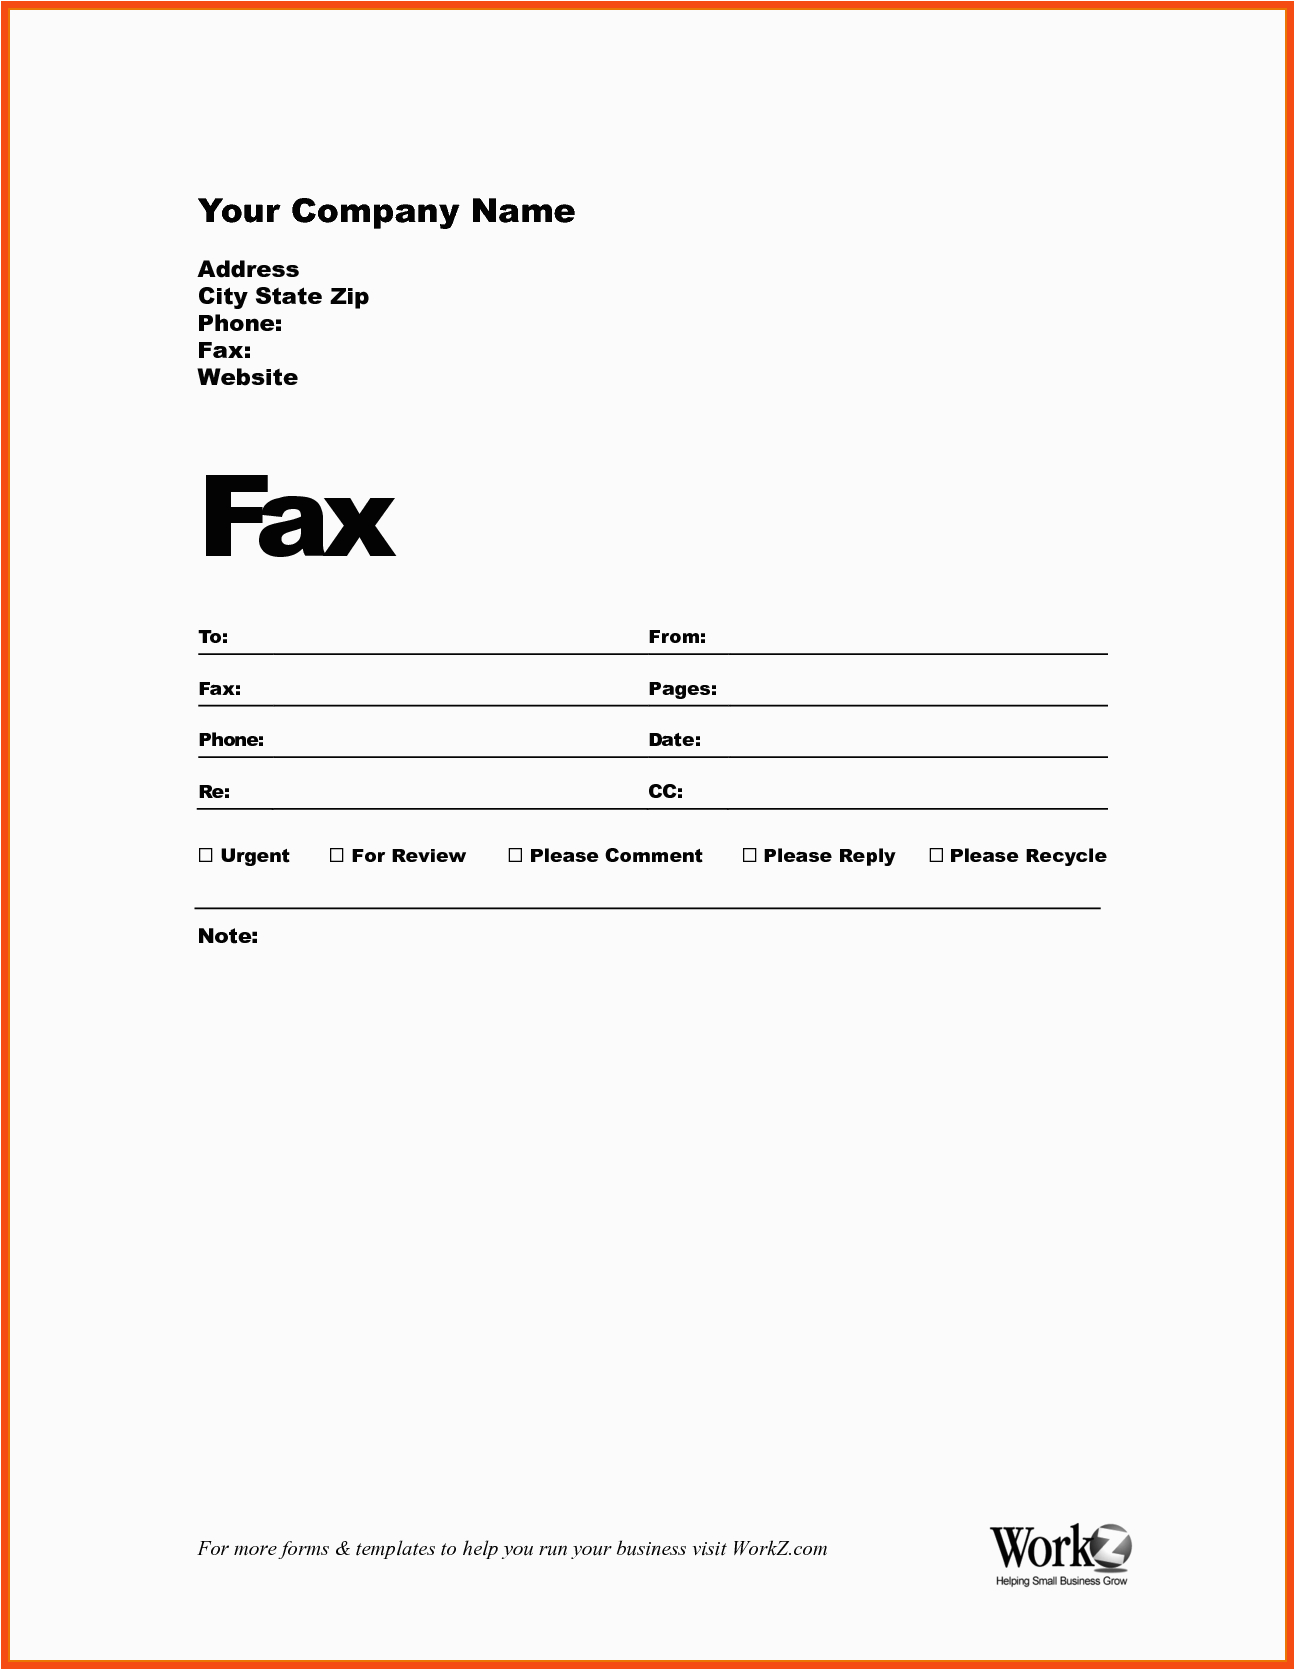 Sample Of Fax Cover Sheet for Resume Unique Basic Fax Cover Sheets Xlstemplate Xlsformats